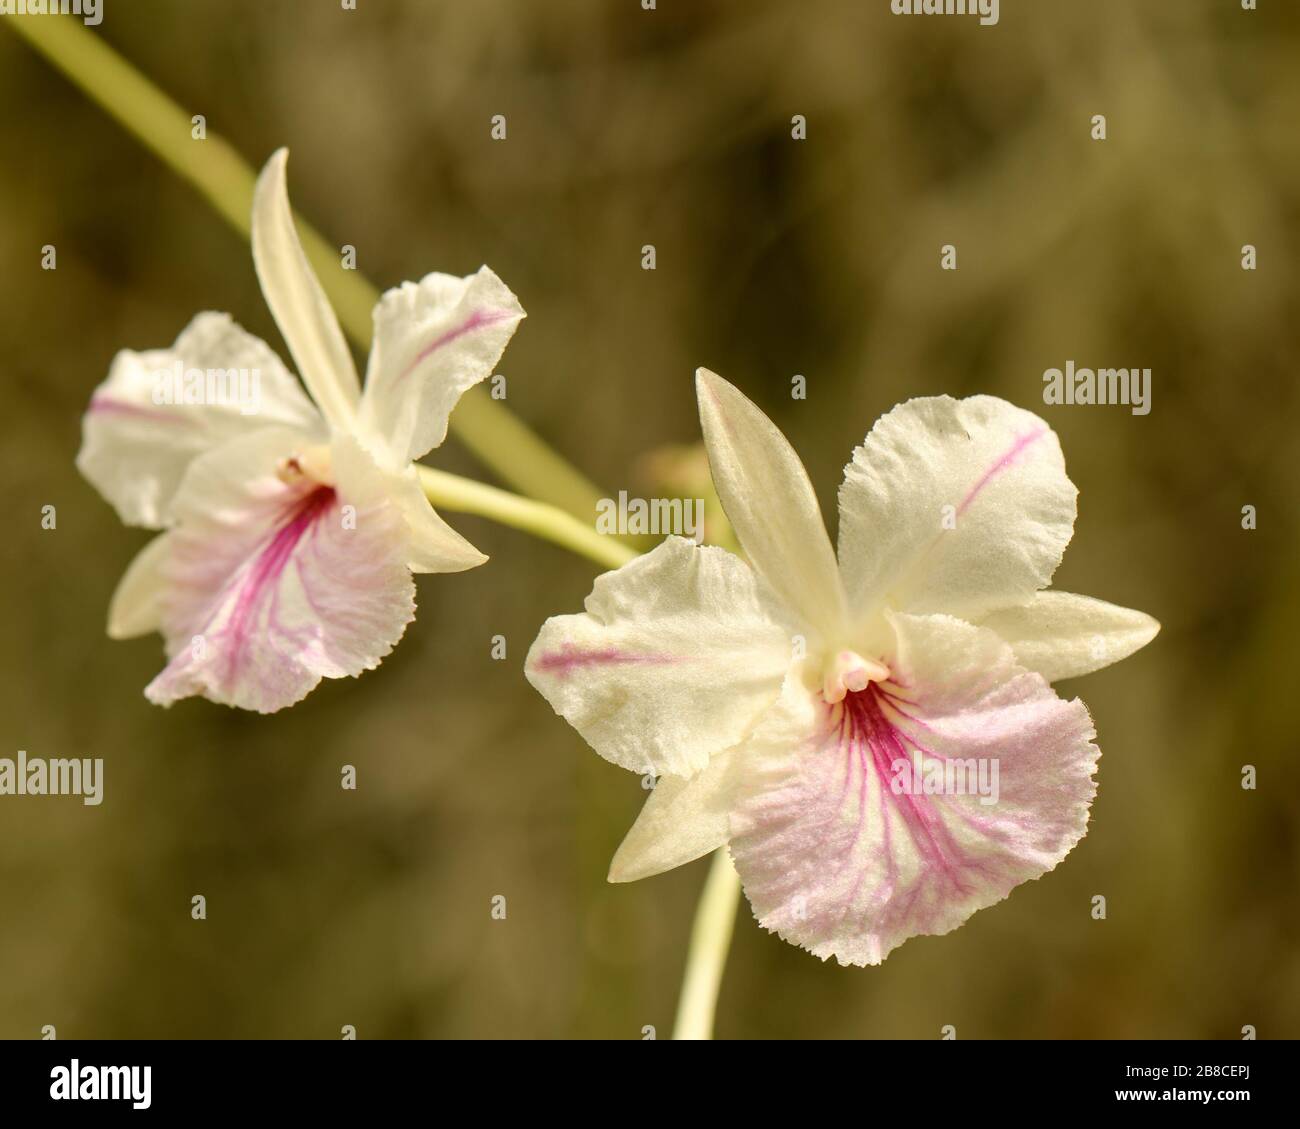 Closeup of two dainty, Pink and Yellow Butterfly Orchid flowers on a stem against a blurred background. Stock Photo